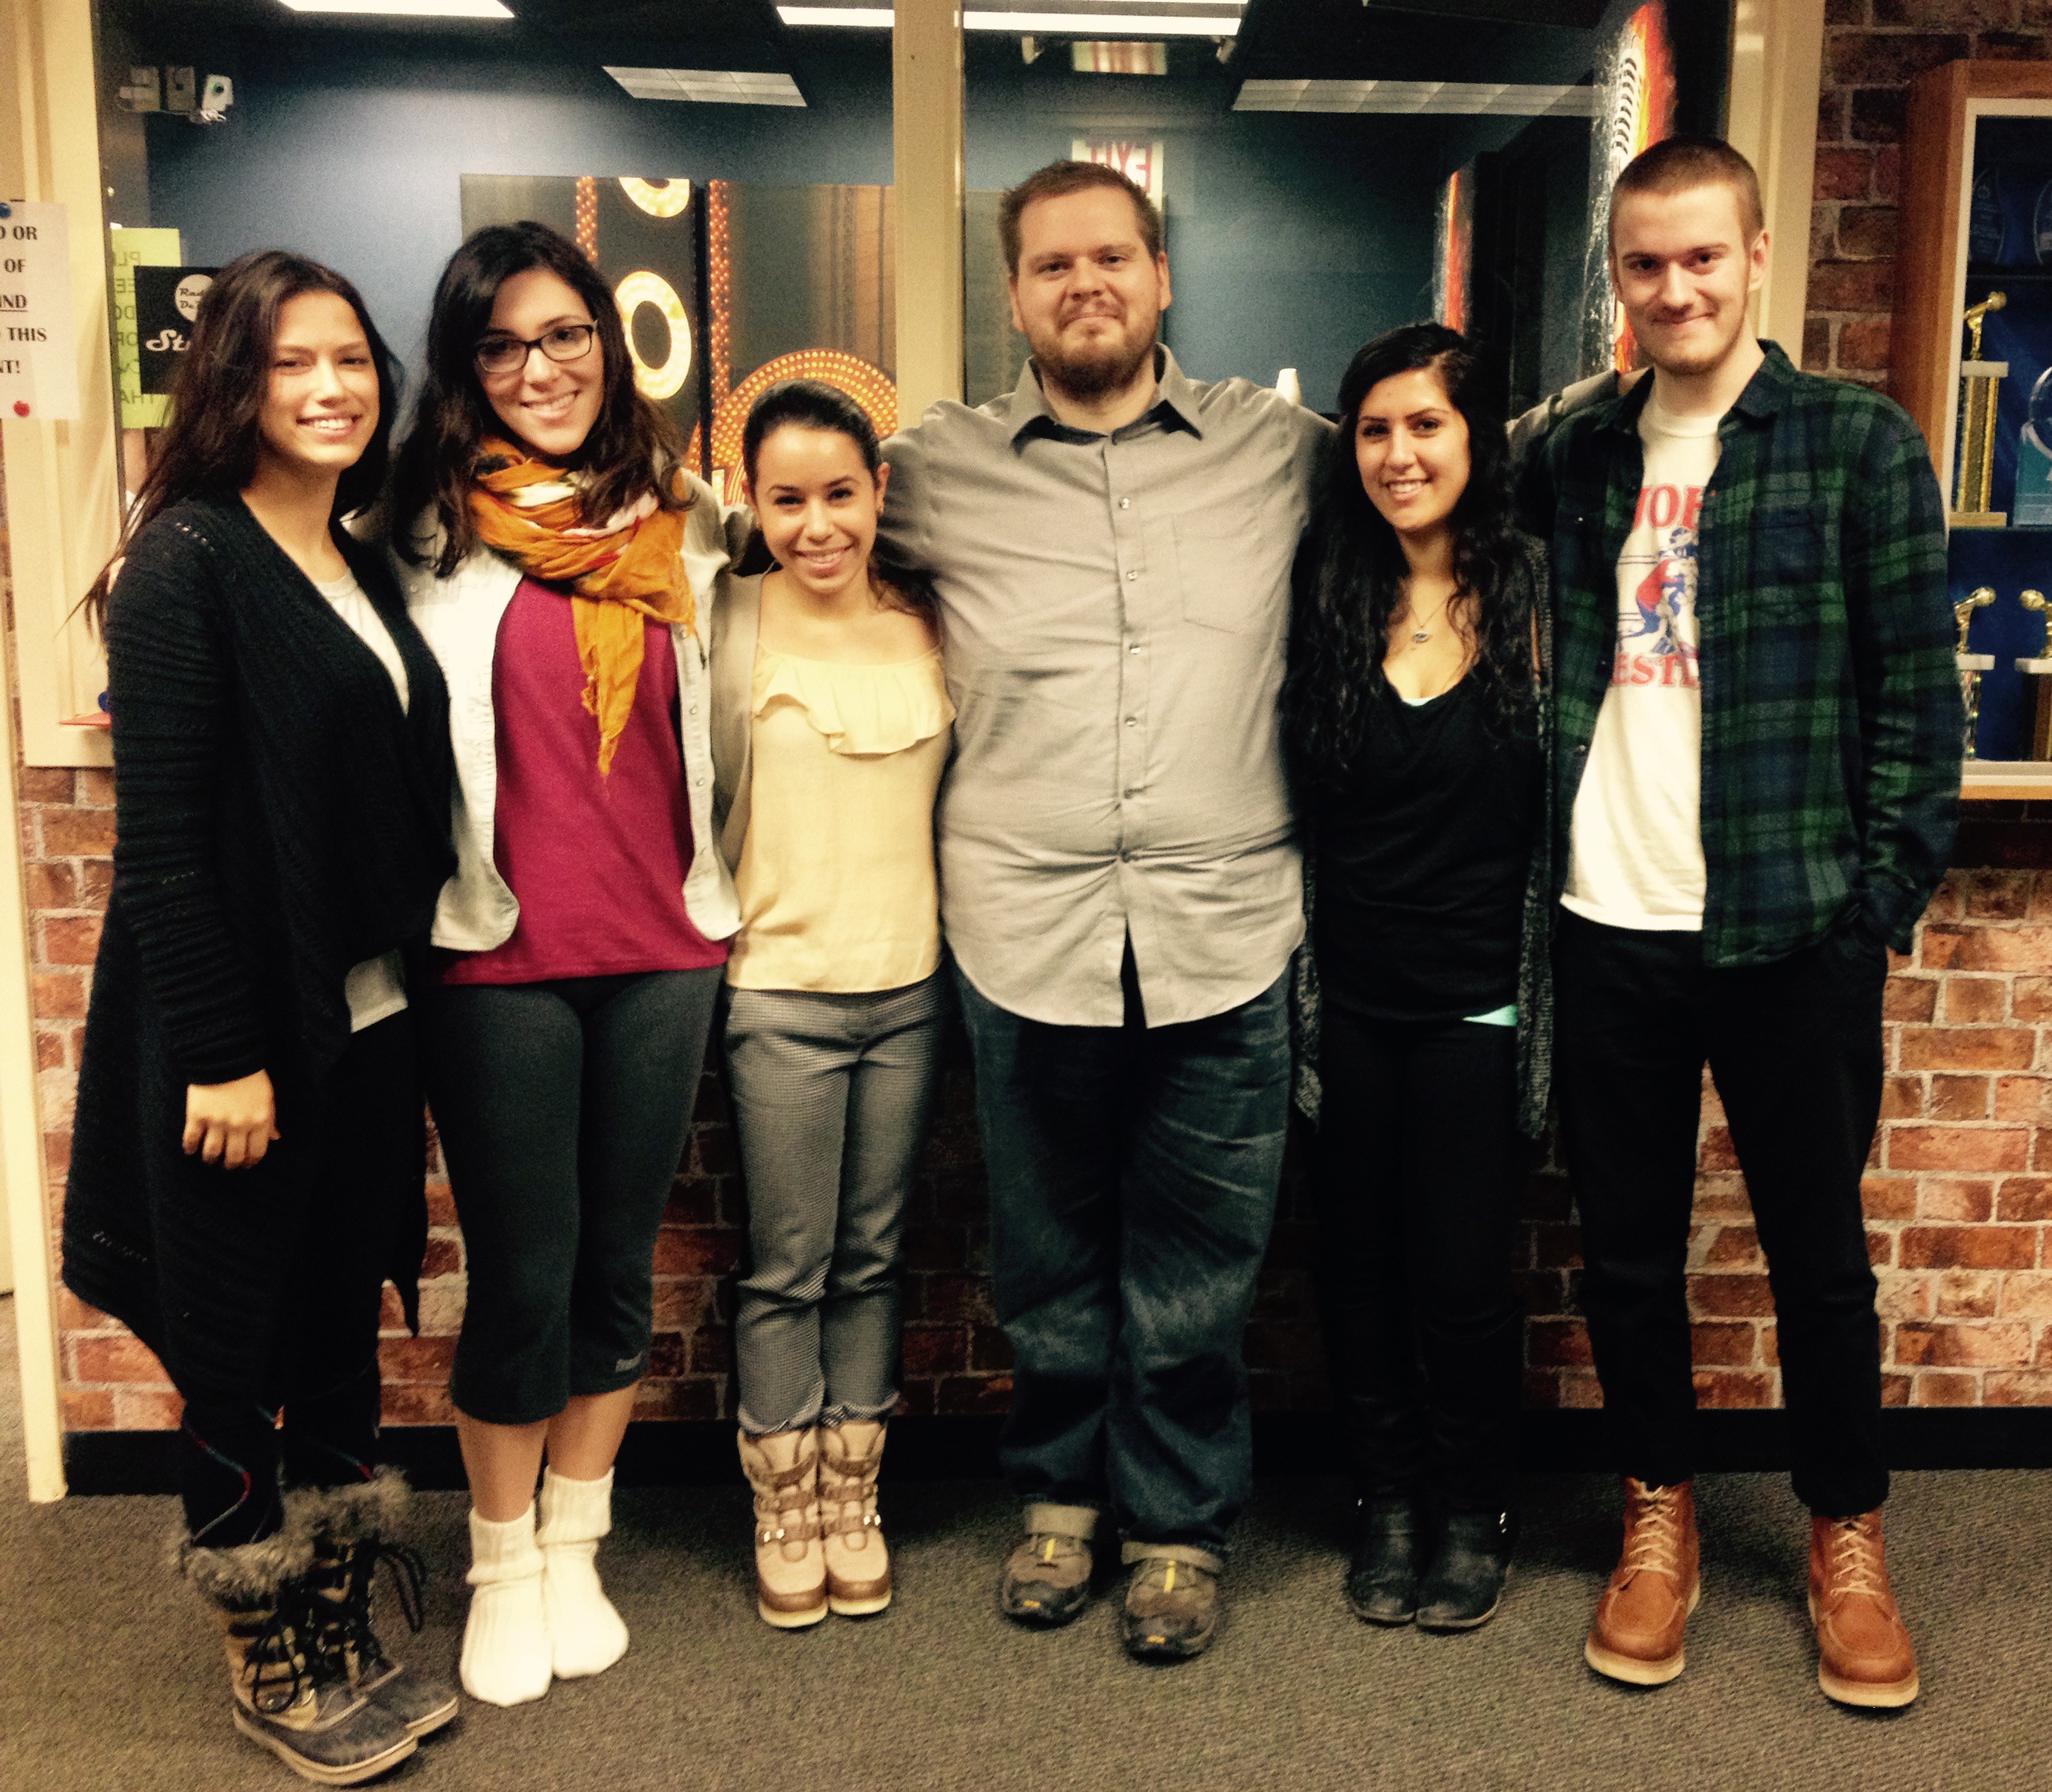 This week Scrawl was joined by the EDGE students! (L-R) Mariah, Megan, EDGE student Gen, Brandon, Rima, EDGE student Will. 